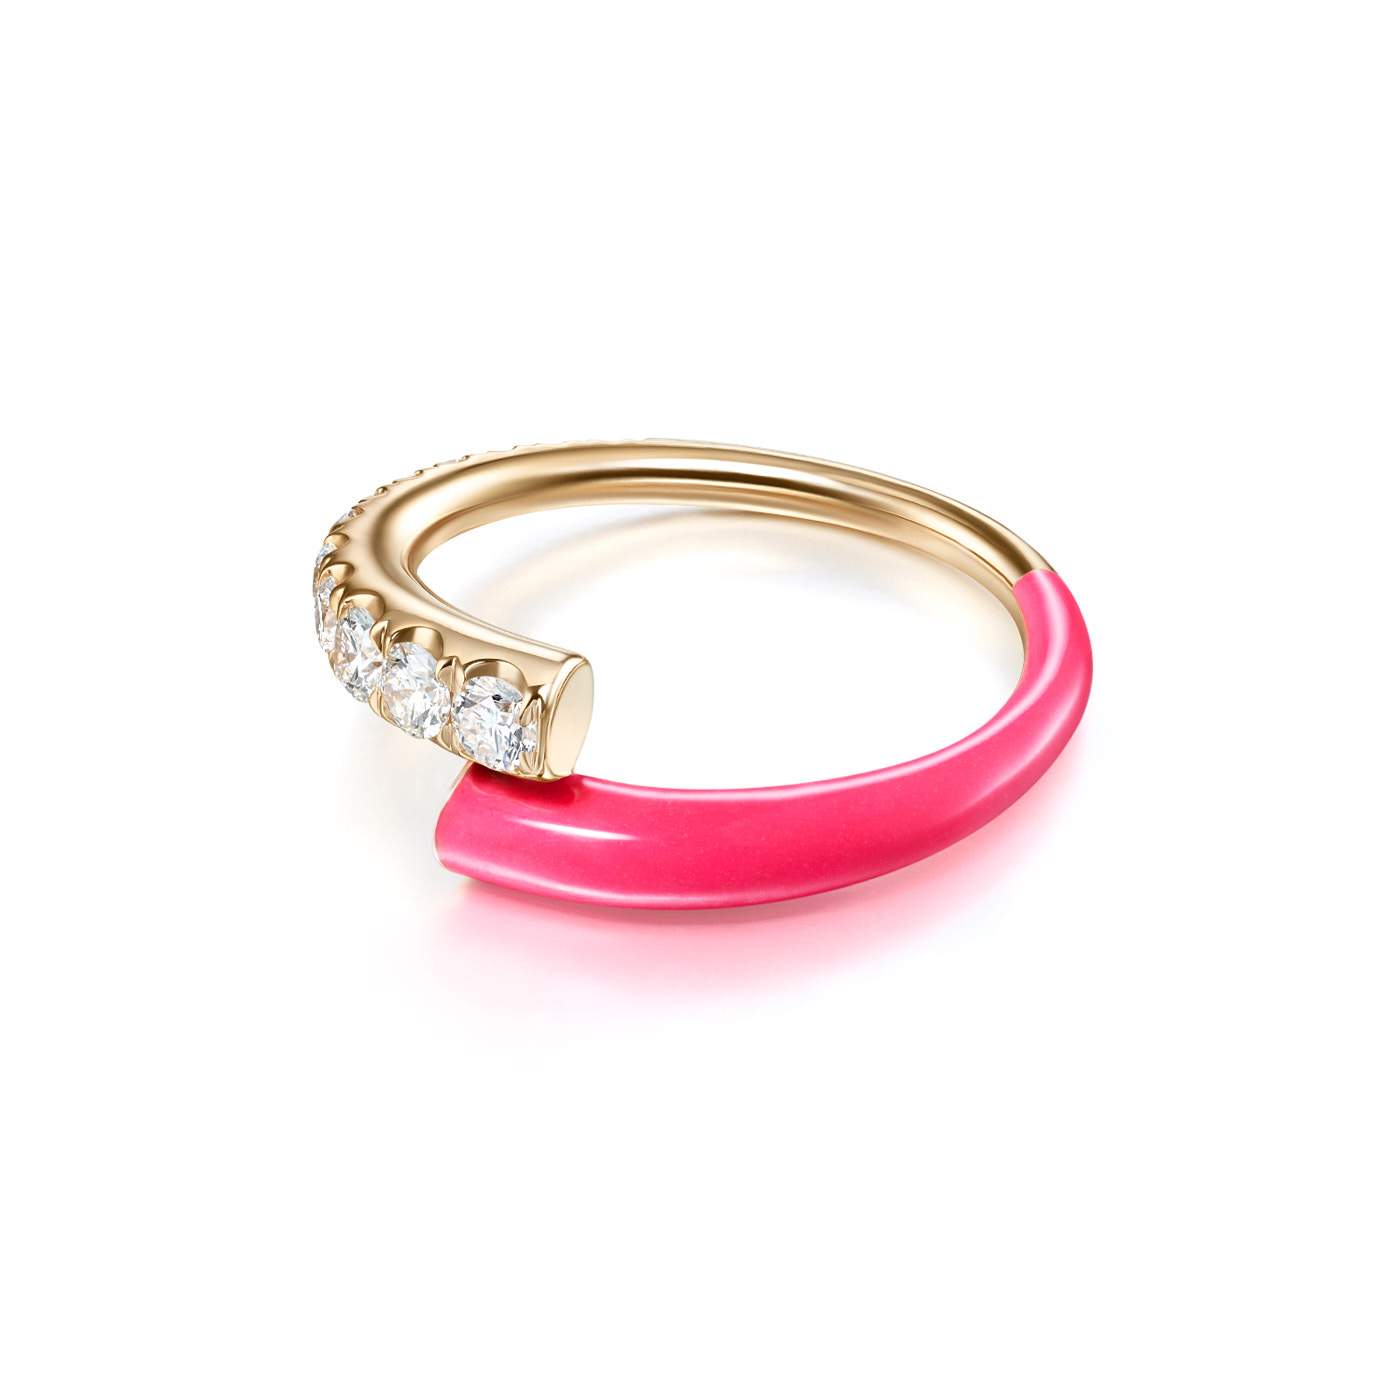 Lola Ring: 18k rose gold with diamonds (0.53 tcw) and neon pink enamel